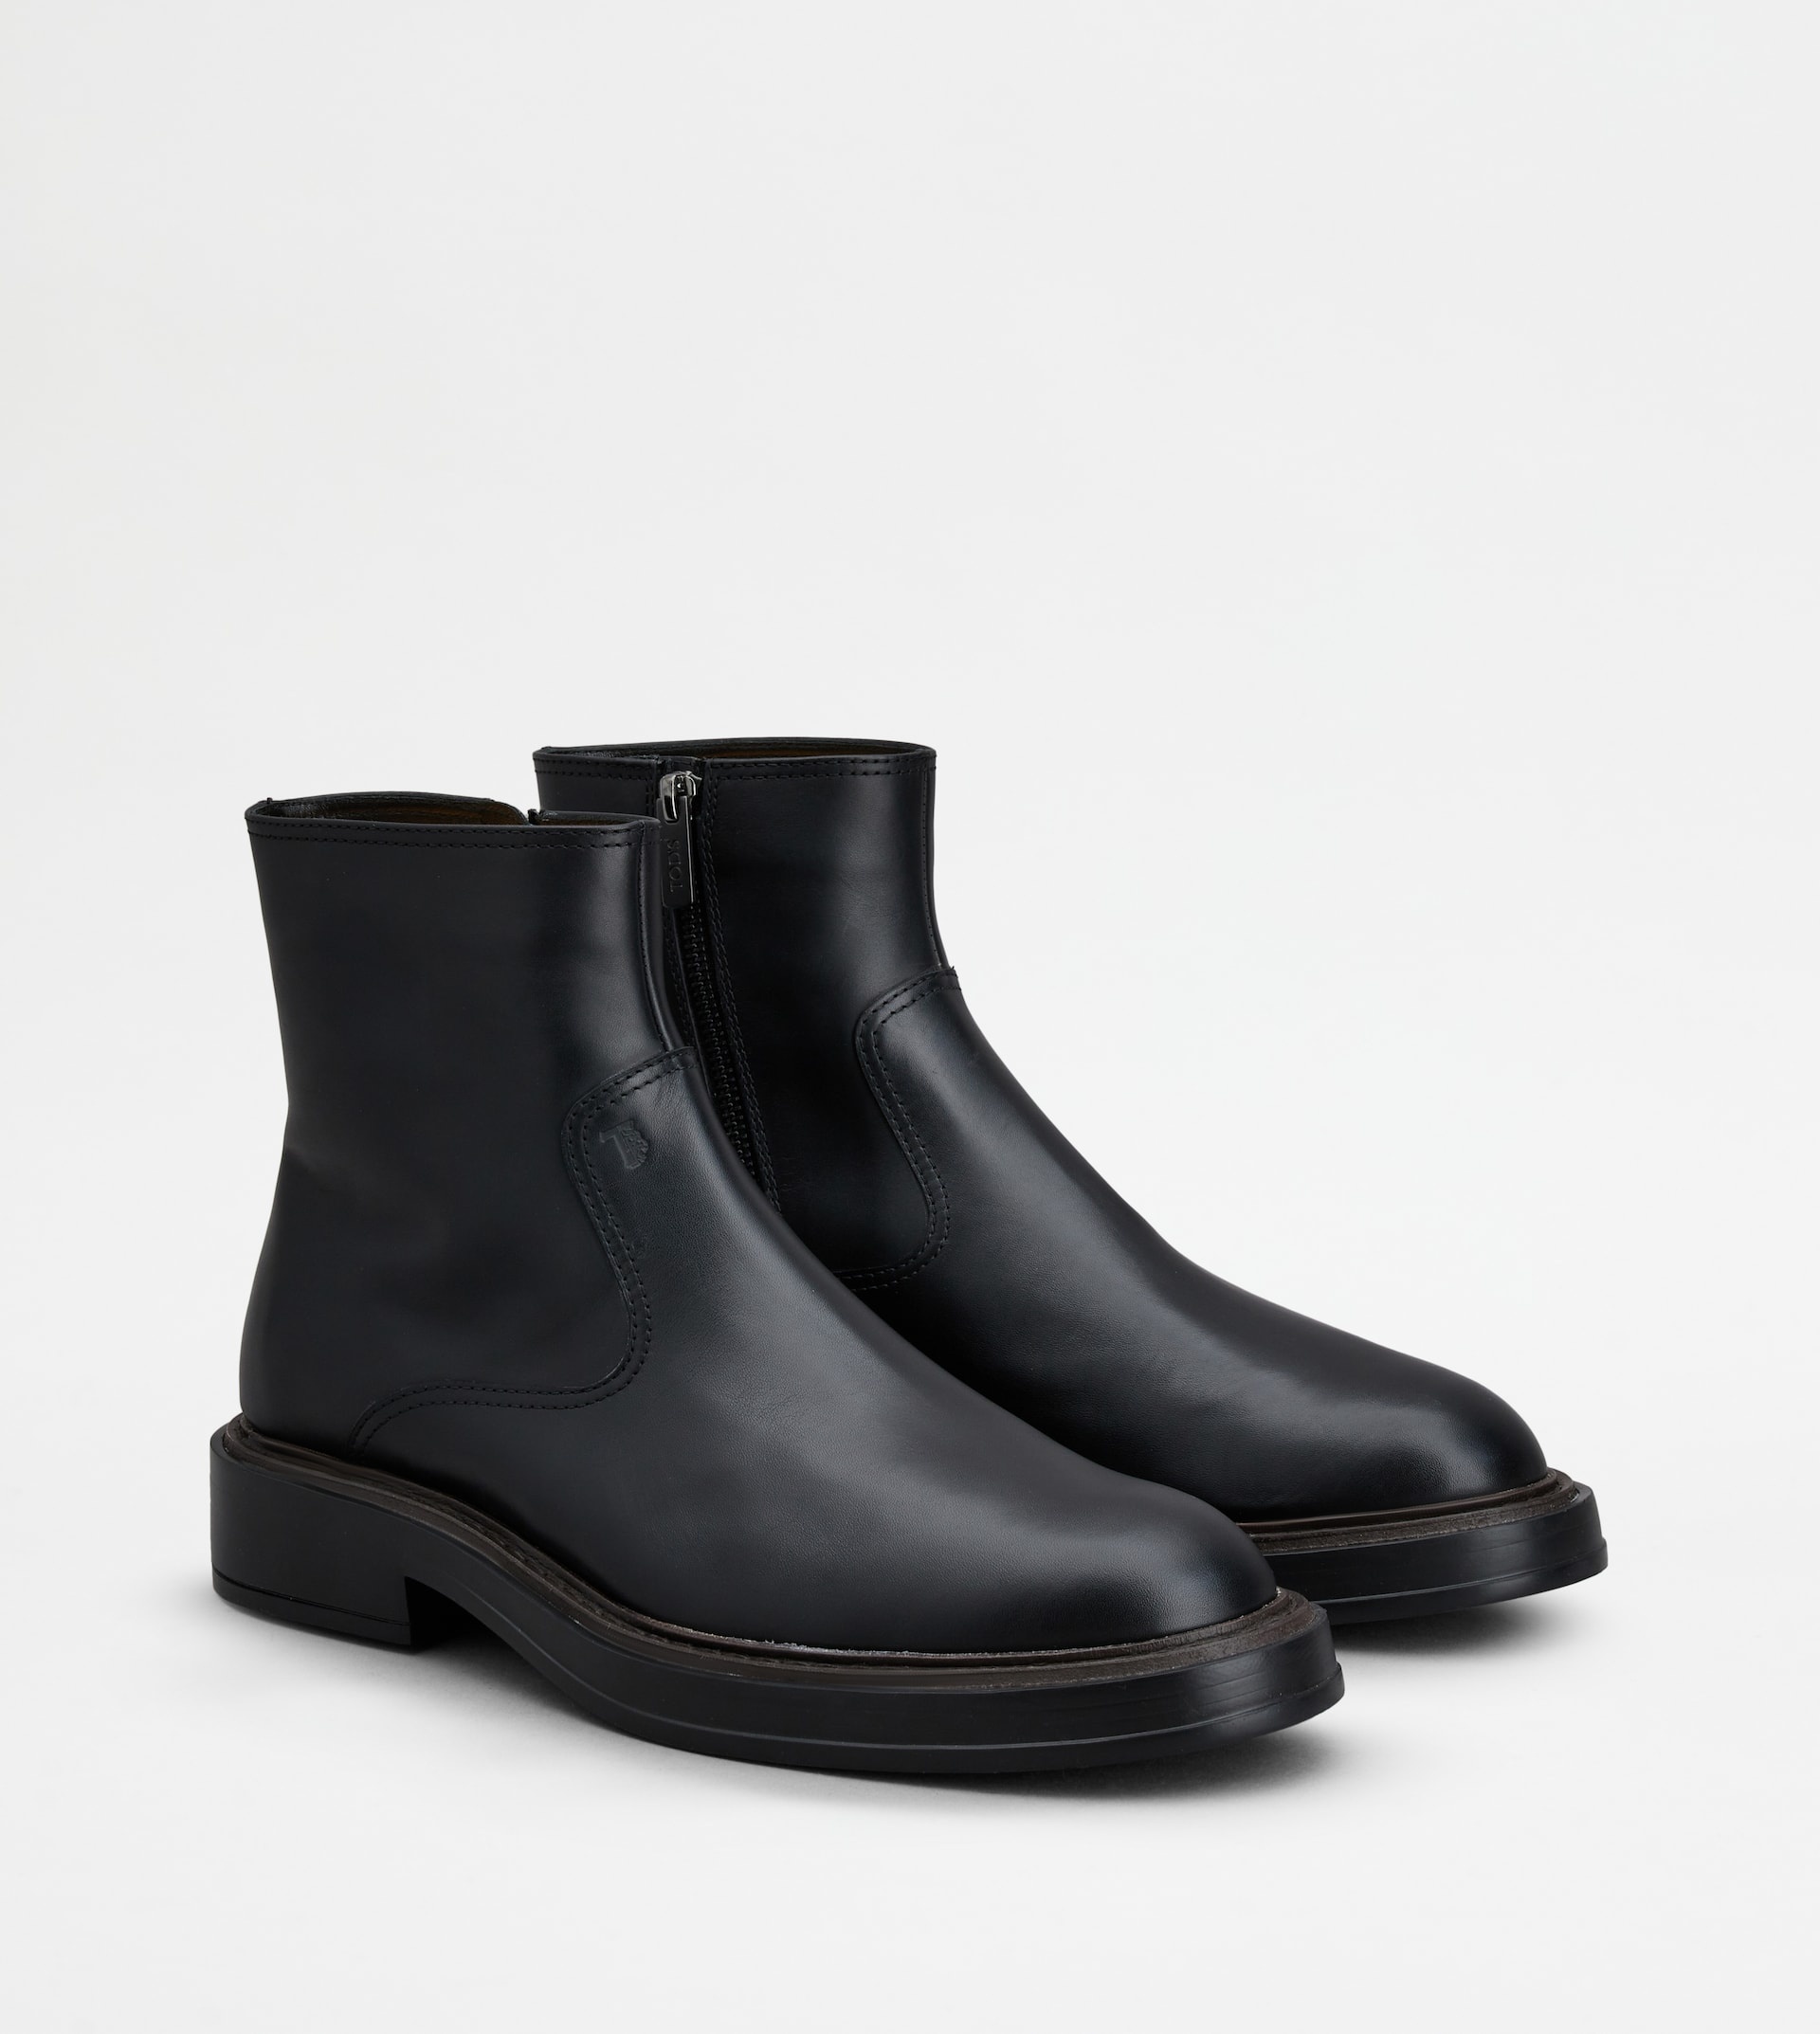 ANKLE BOOTS IN LEATHER - BLACK - 4